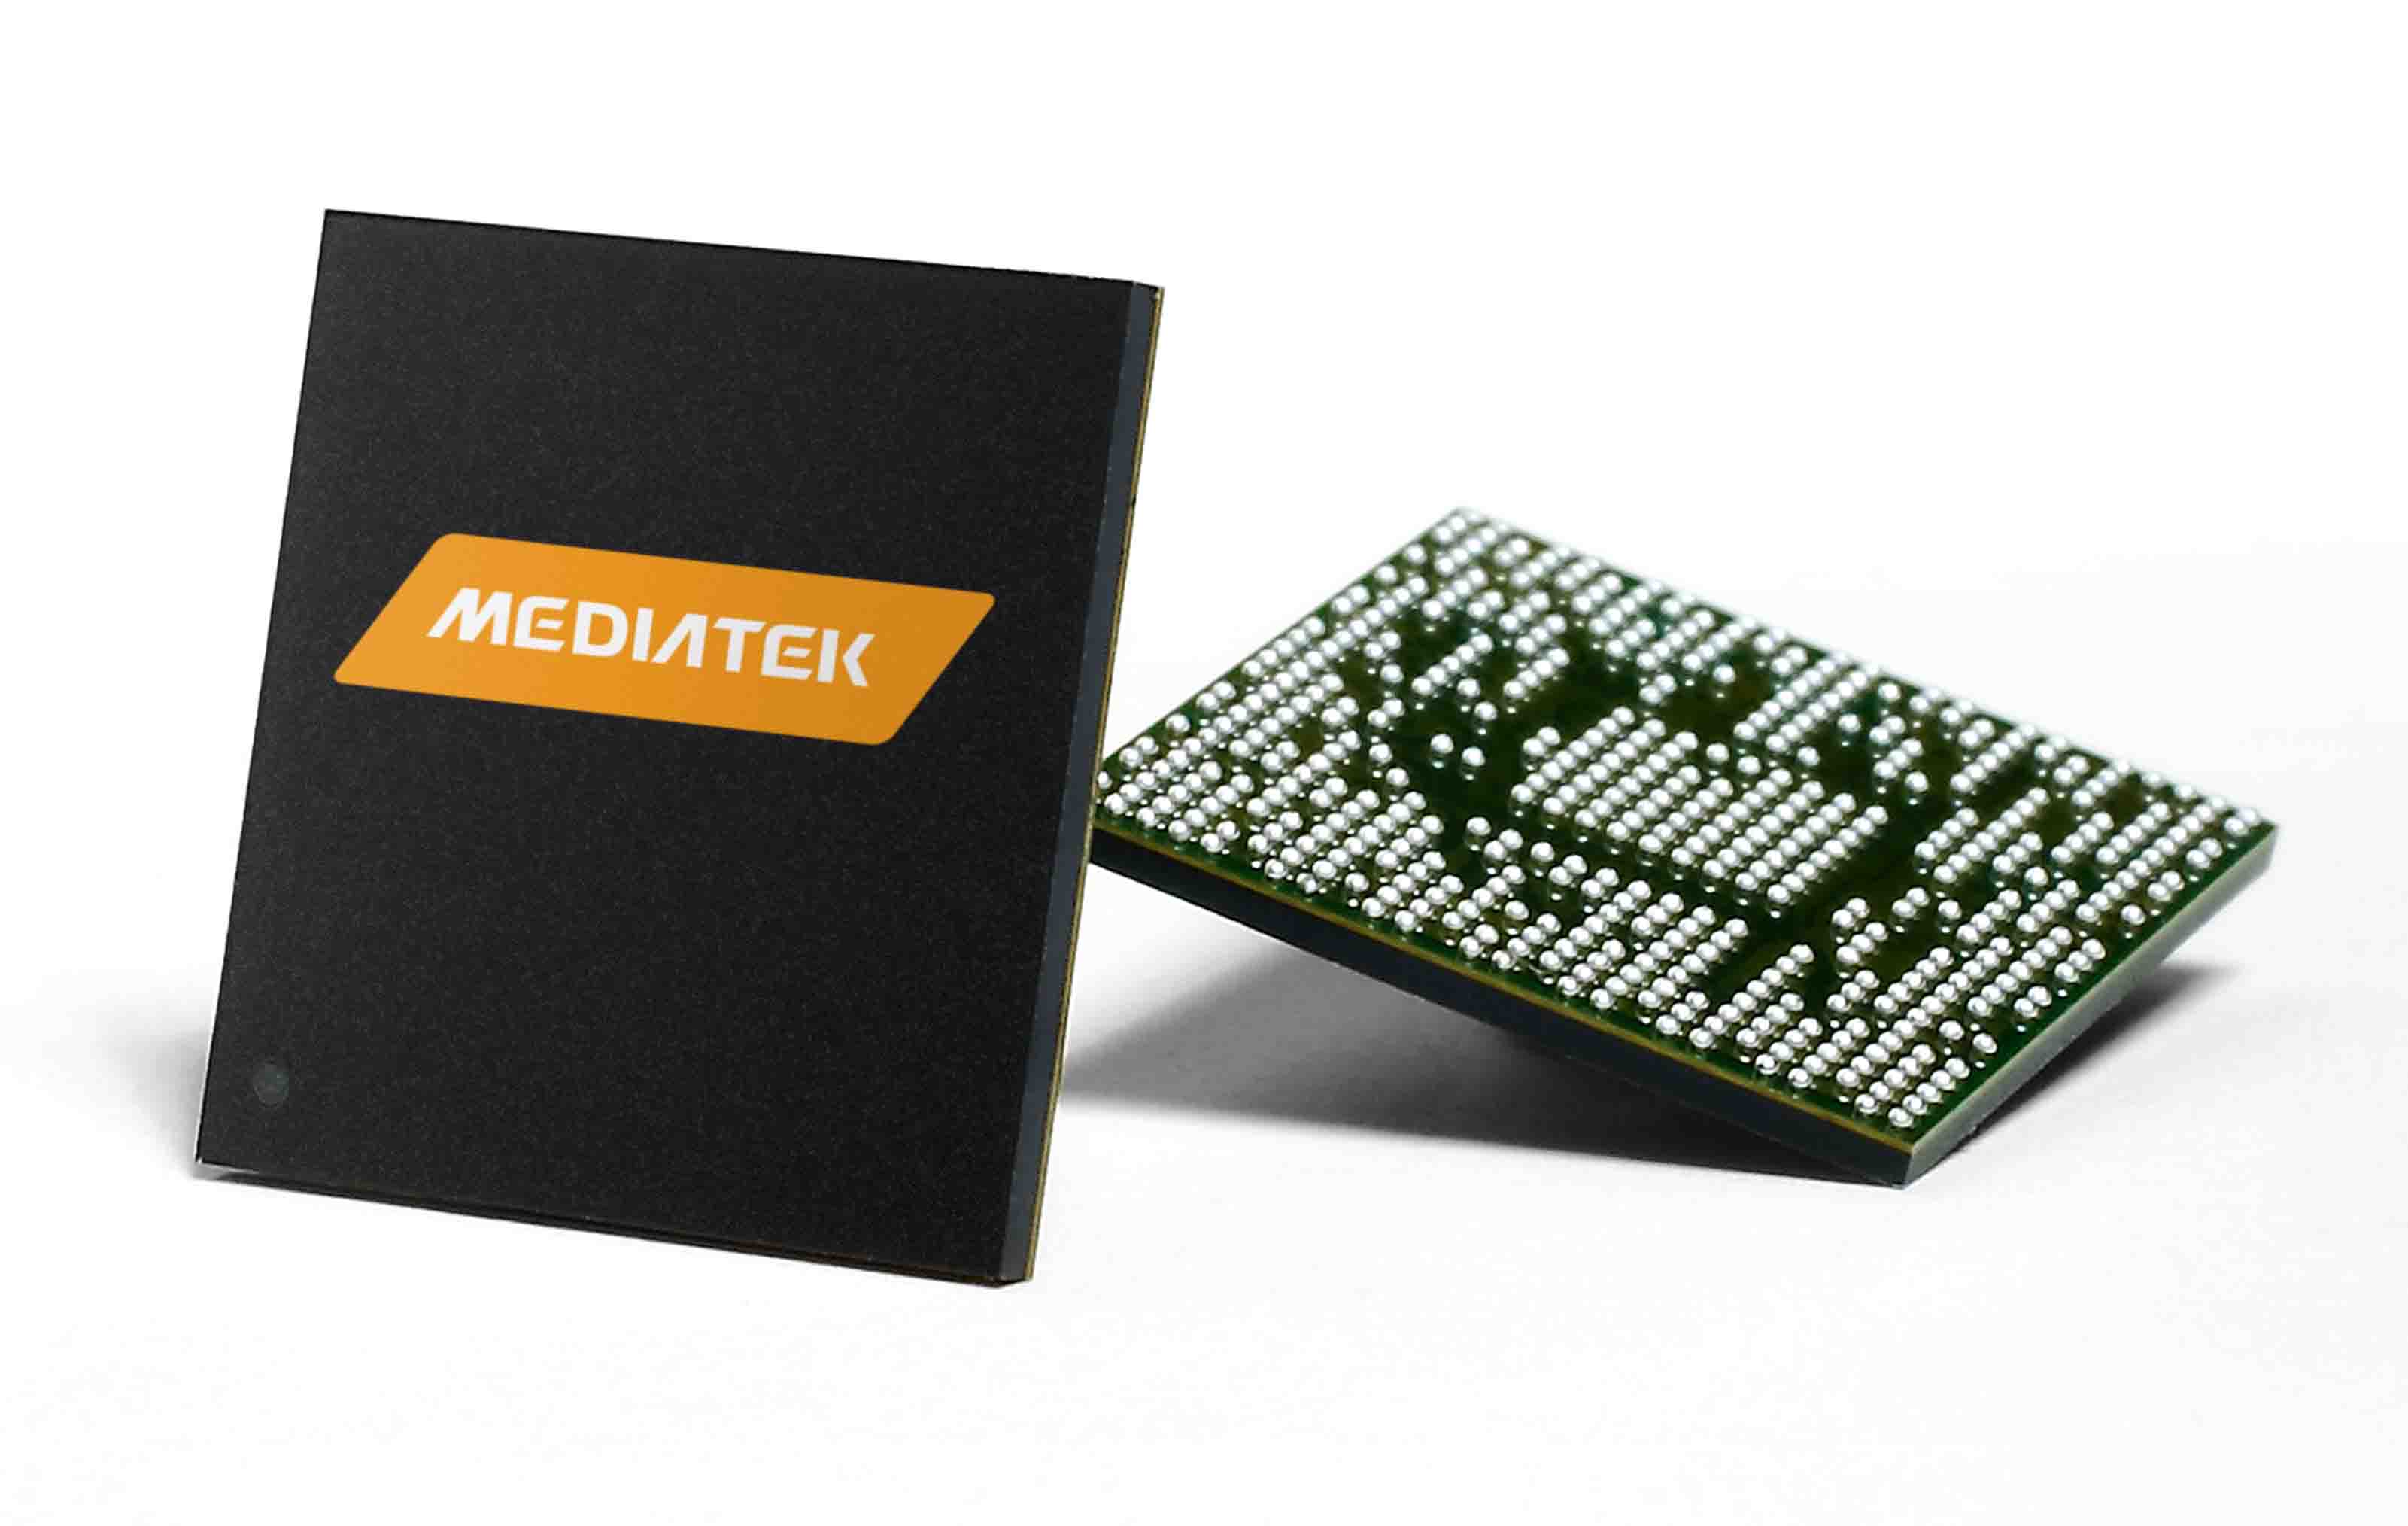 Apple reported to get LTE modems from MediaTek for its 2018 iPhone series